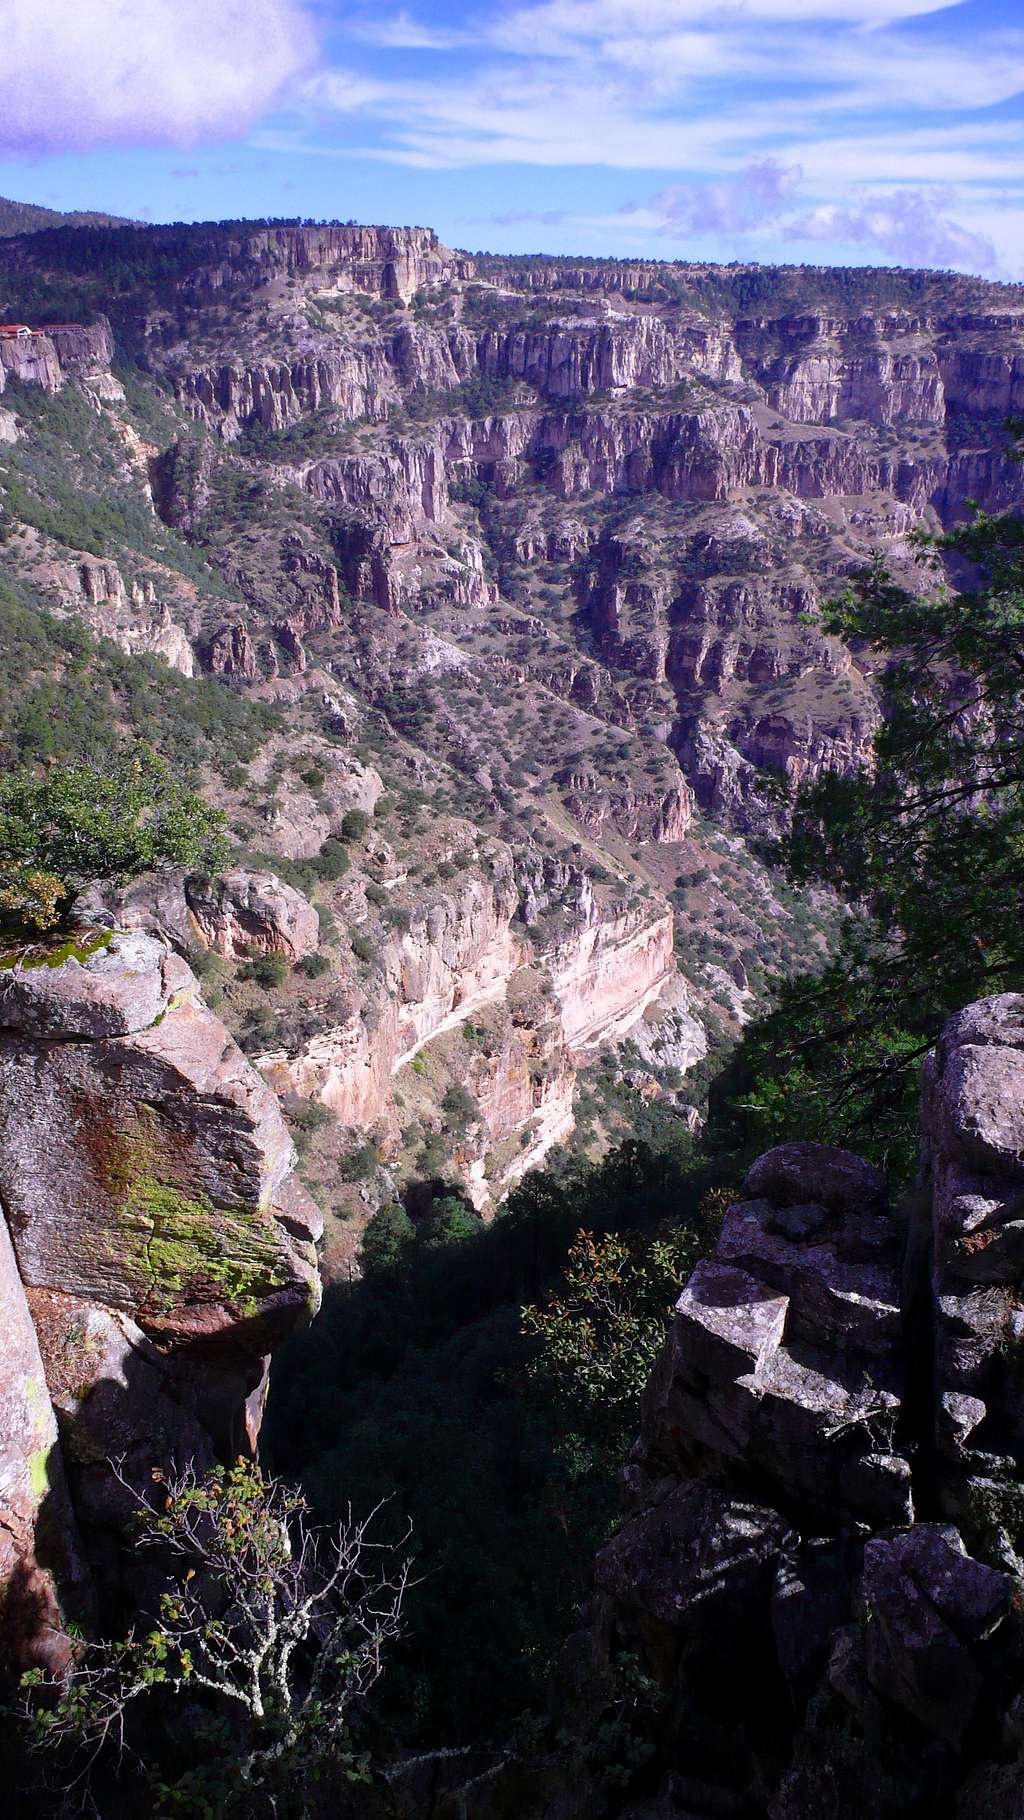 A Canyon Overlook point